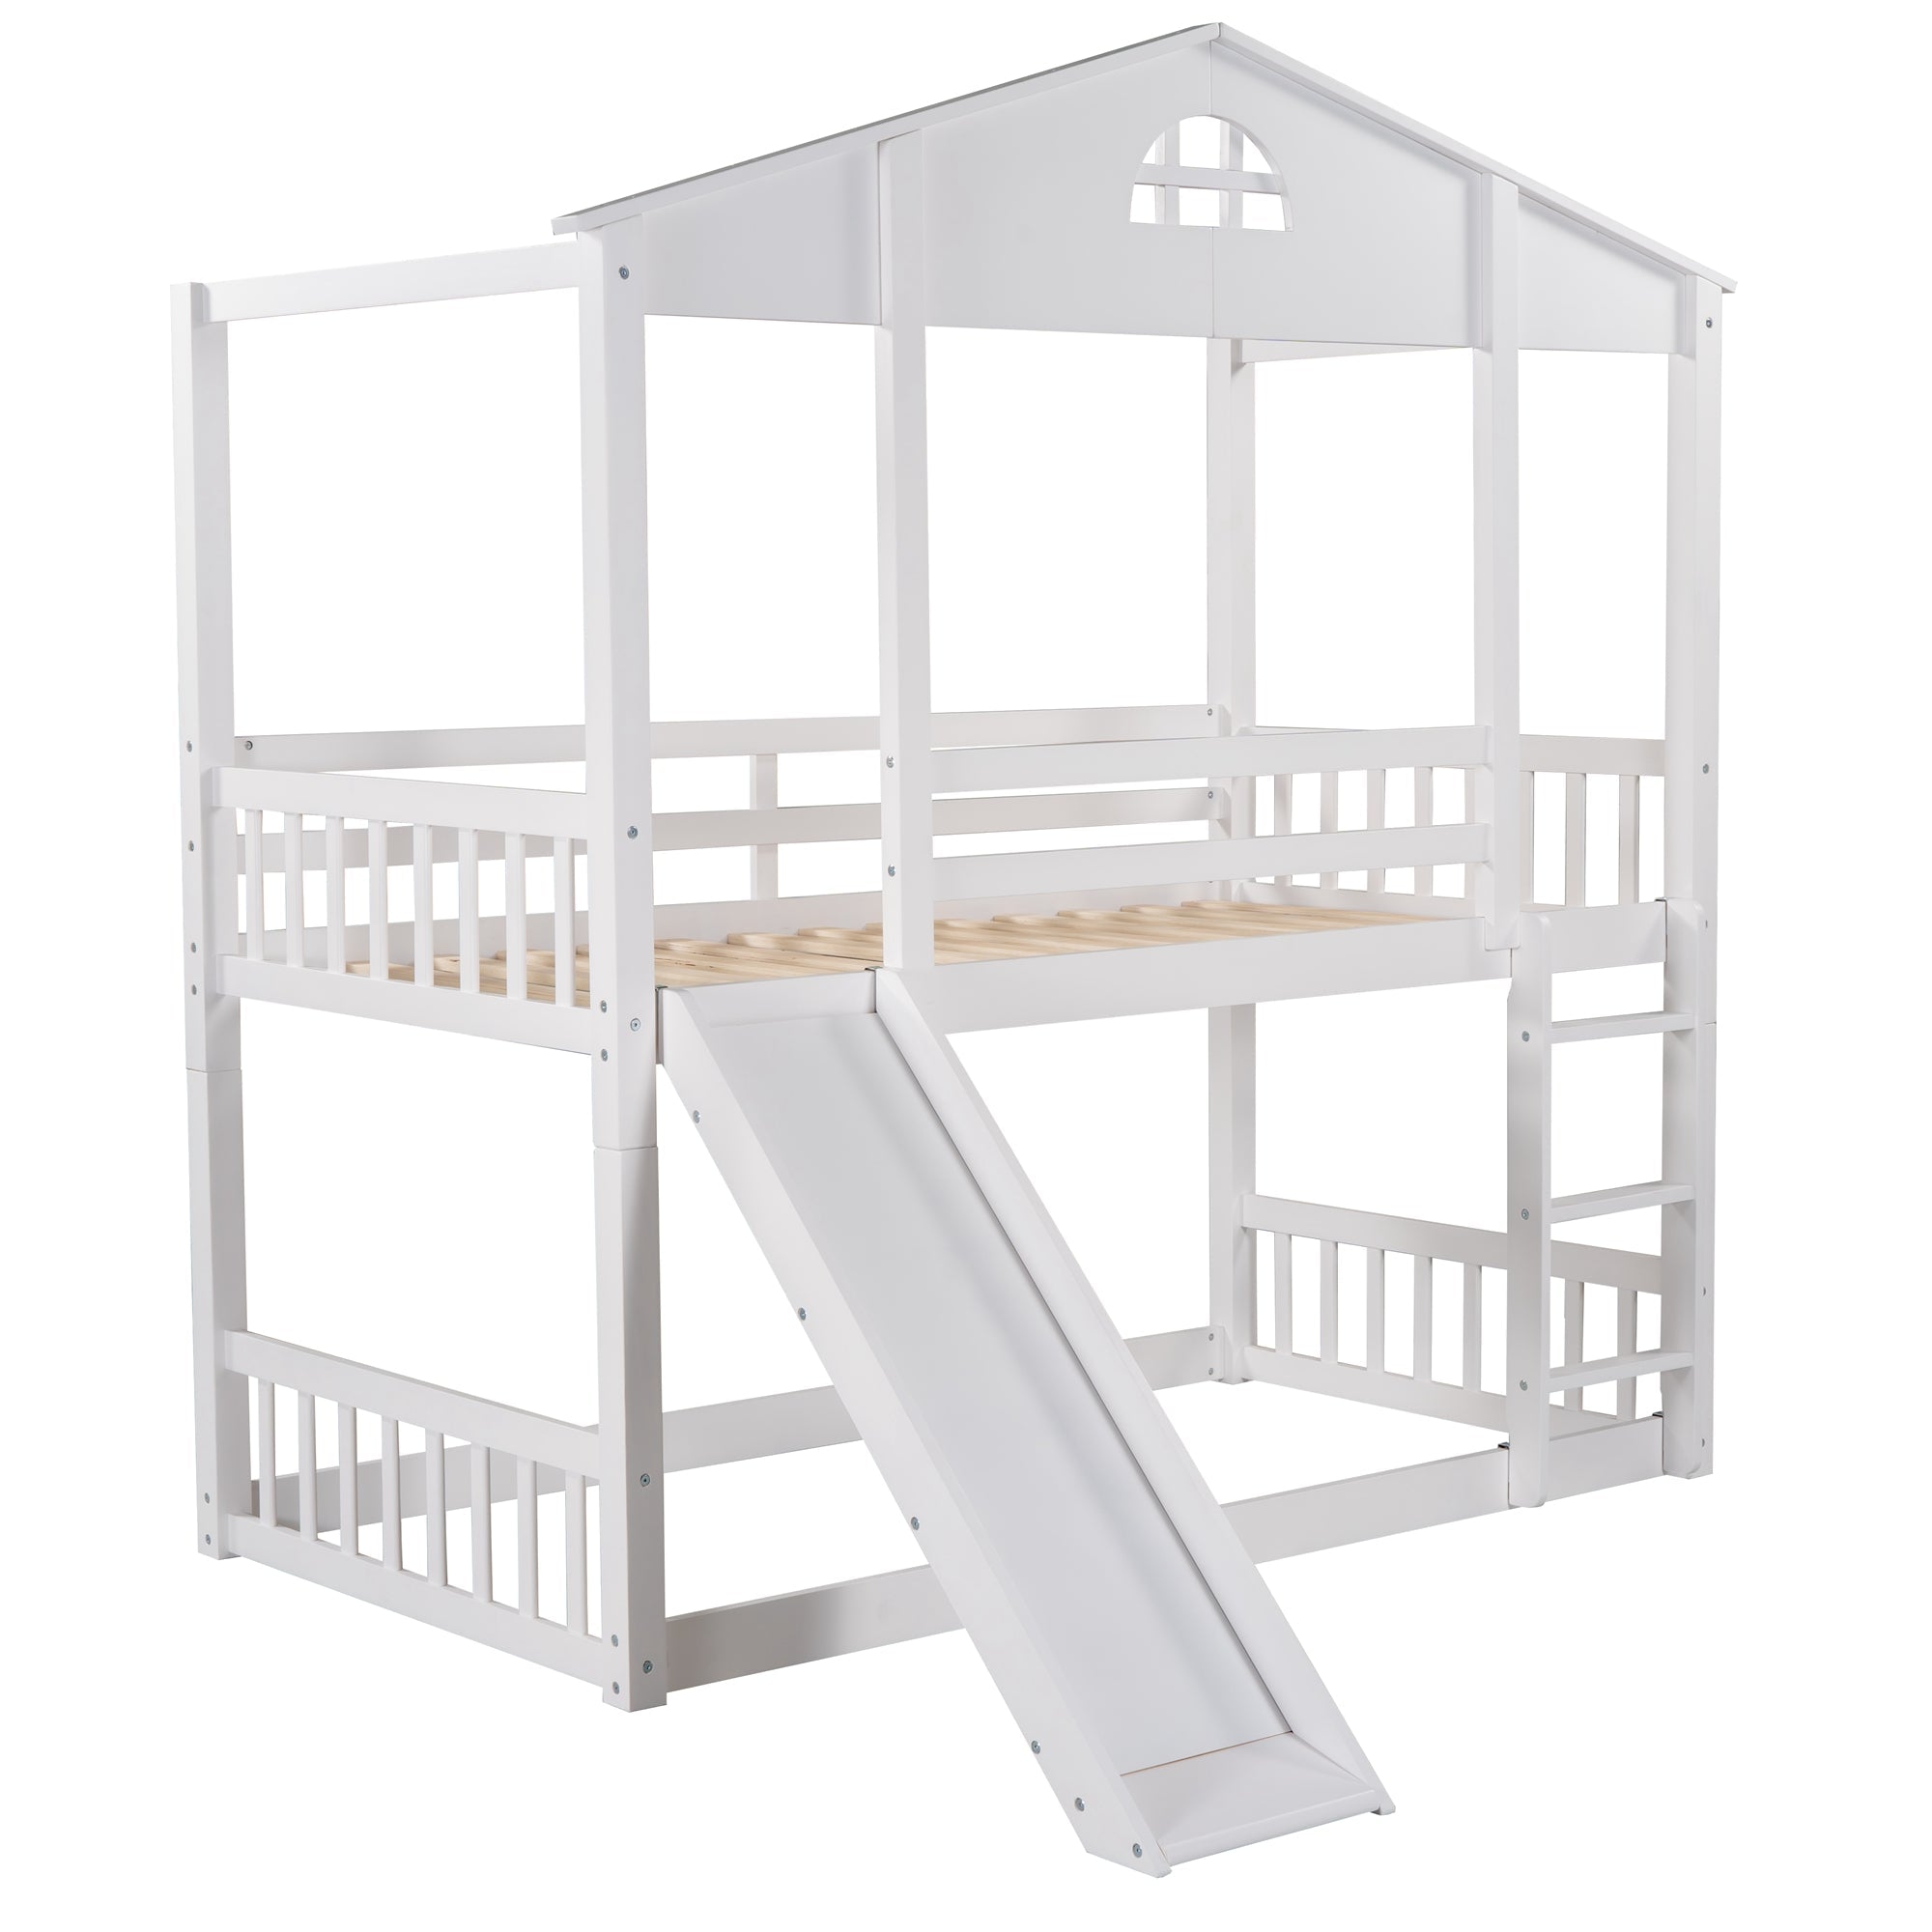 Twin House Bunk Bed with Convertible Slide and Ladder for Kids Room, White